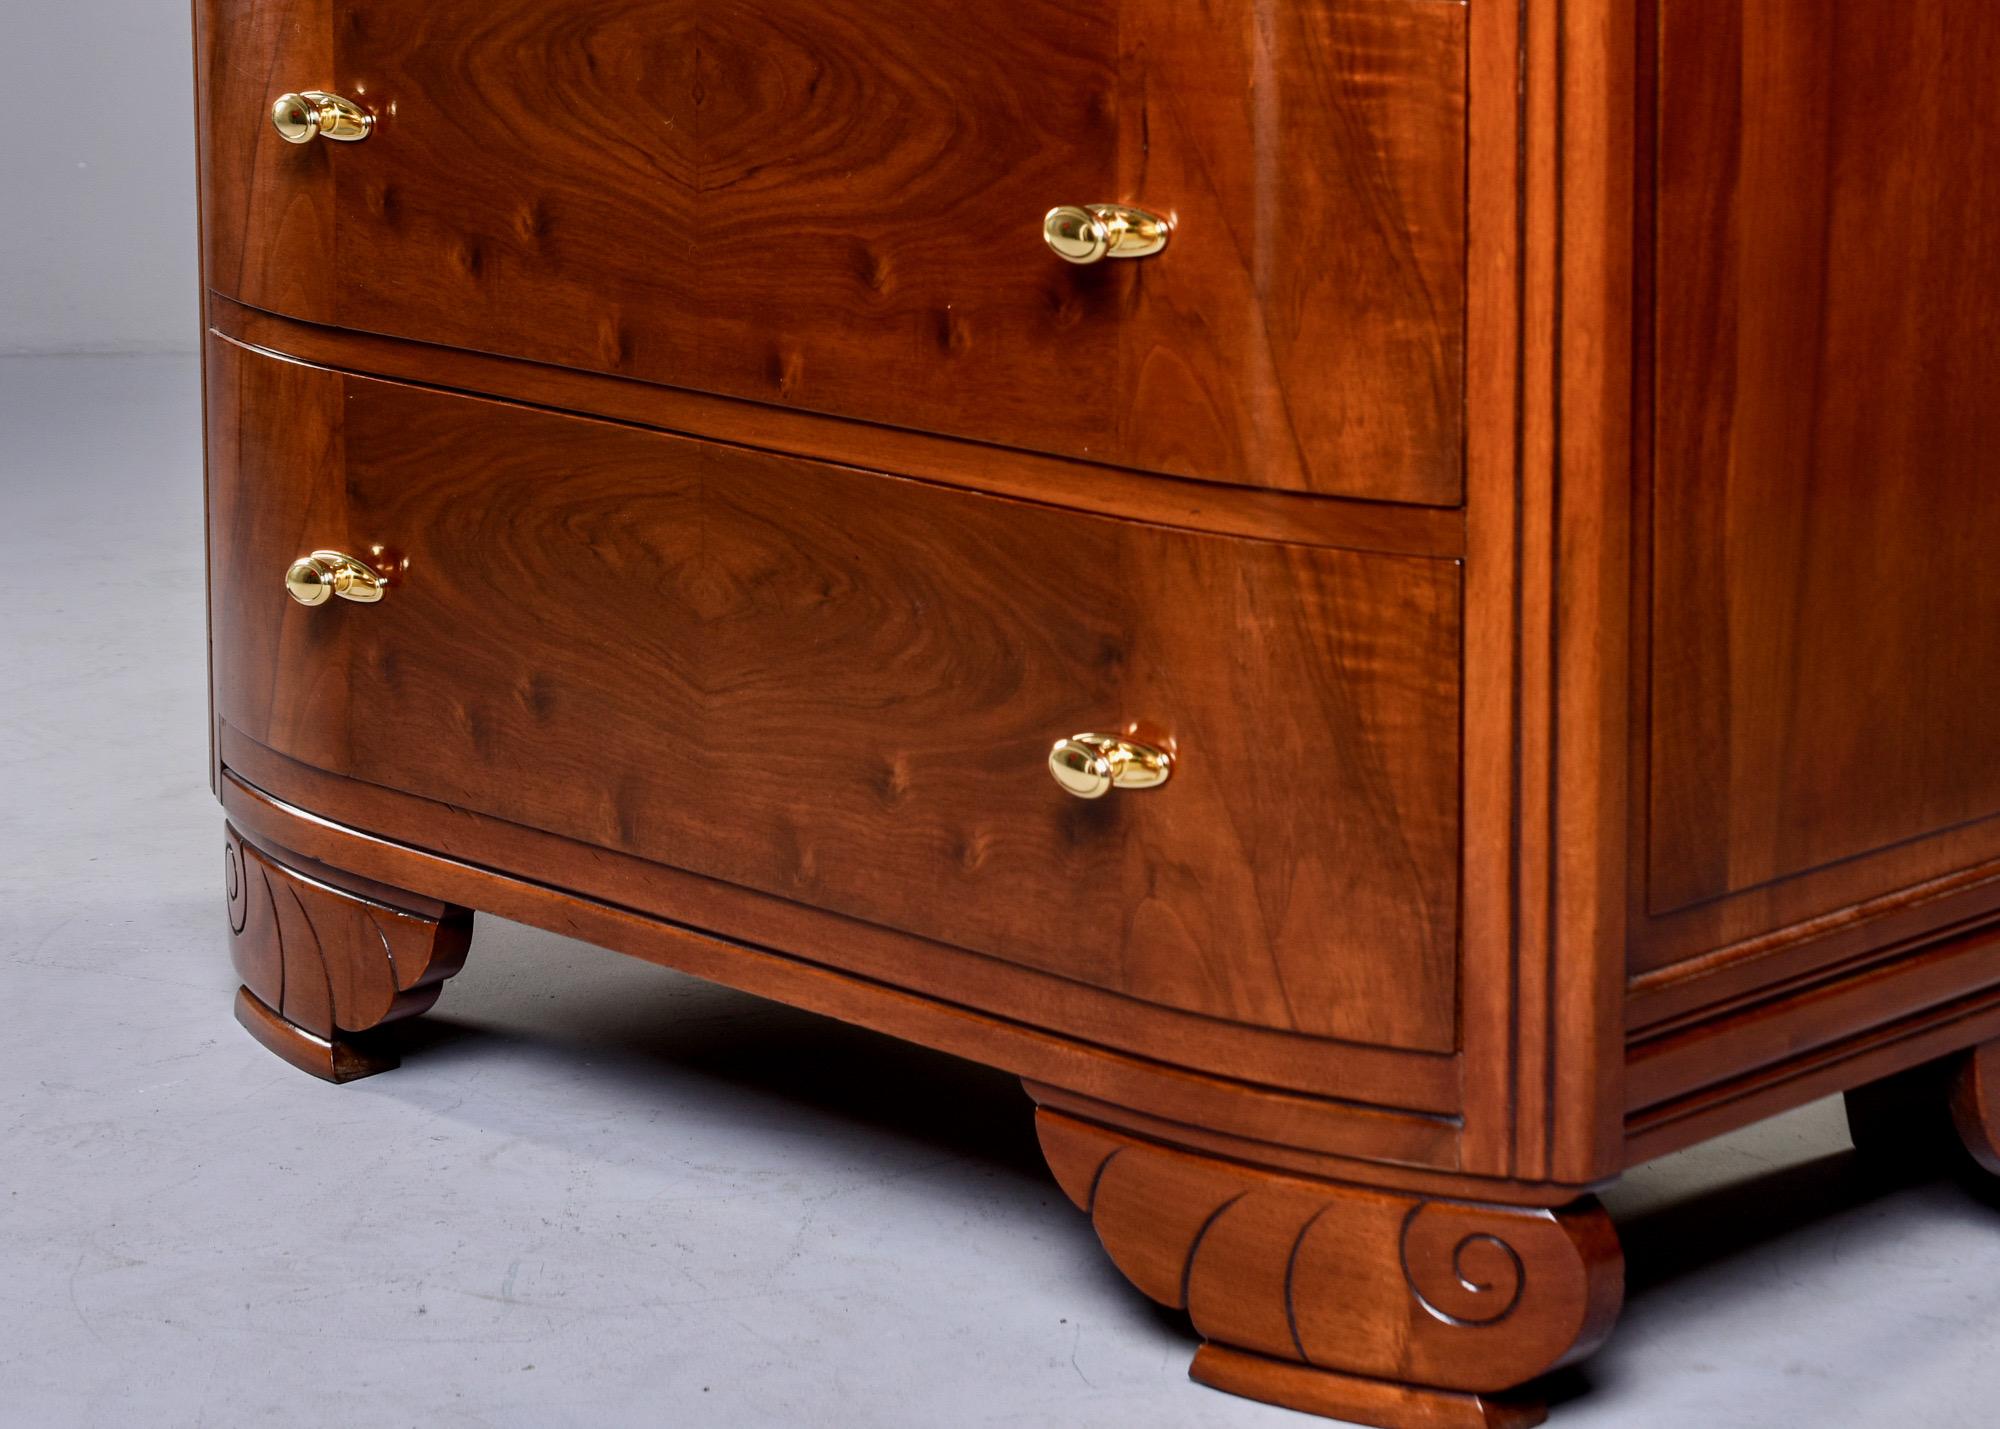 French Art Deco chest of three drawers in walnut burl veneer, circa 1930s. Curved and carved feet and new polished brass hardware. Versatile size can be used to flank a bed or sofa. Unknown maker.